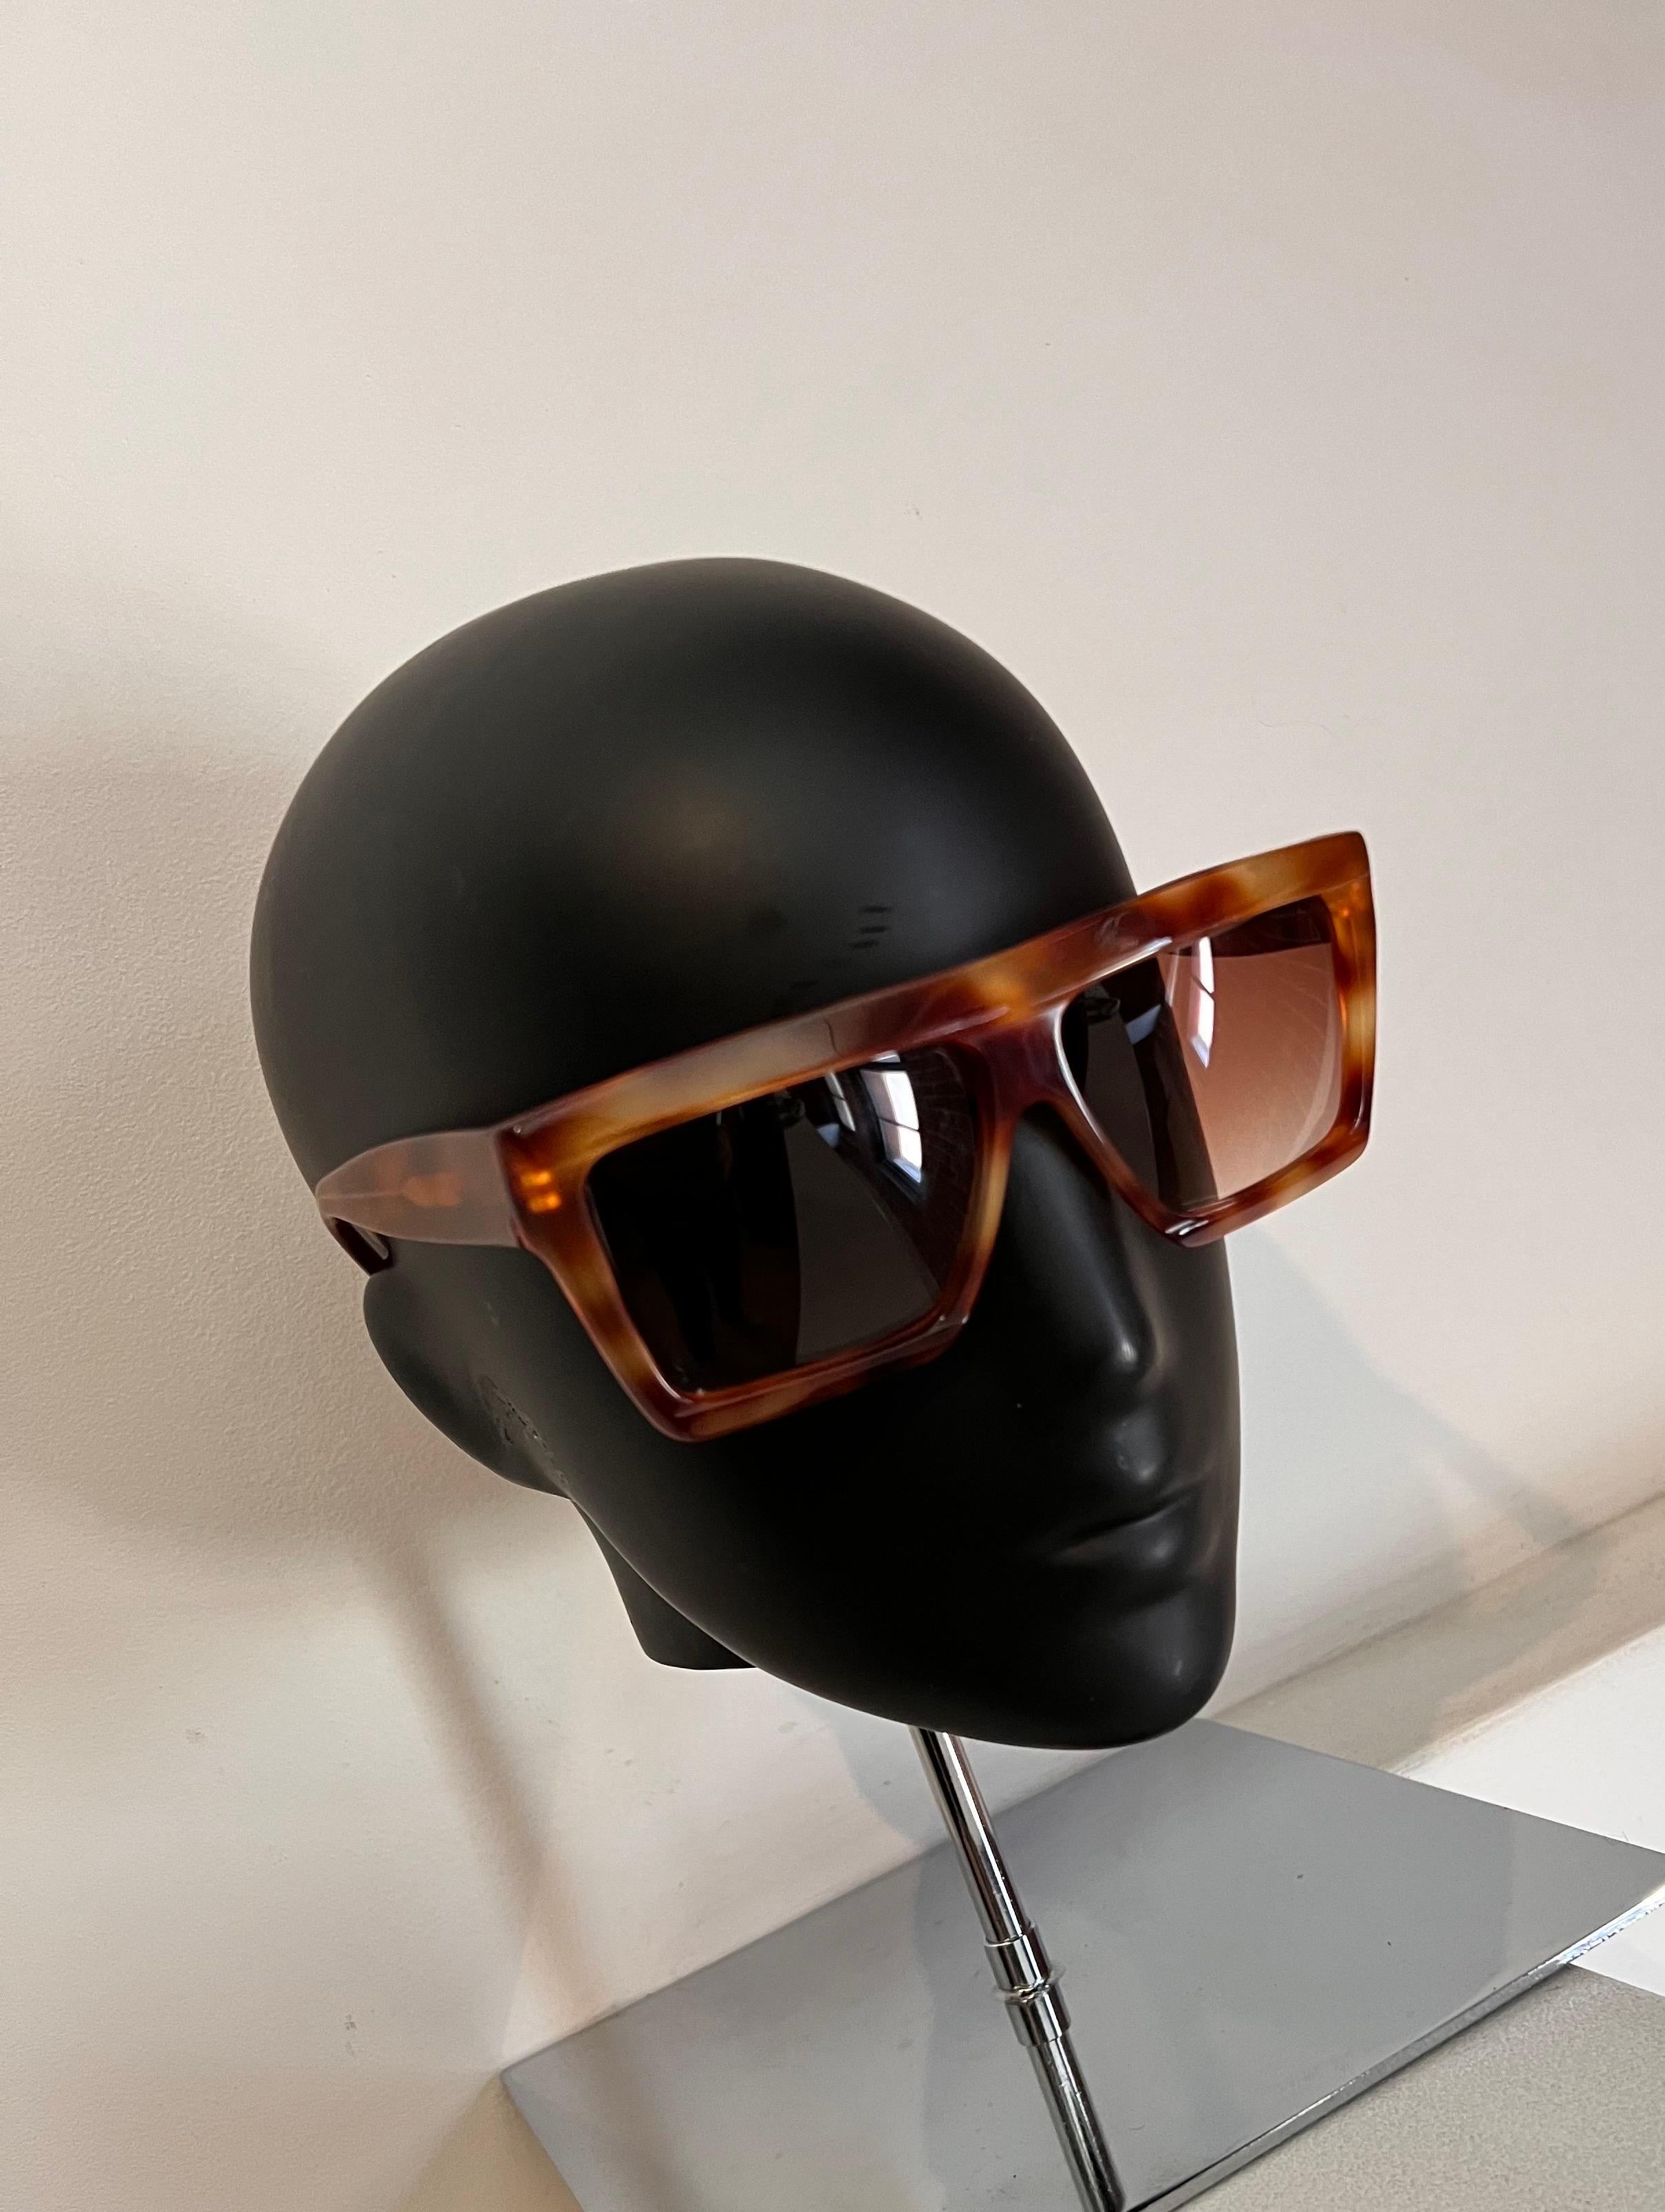 Super cool and stylish, rare and unique Andre Courreges 1980’s sunglasses. 
Square style tortoiseshell frame with gold accent holding a spotless pair of tan lenses.

New, never worn or displayed. One of a kind piece of eyewear history.

This pair is